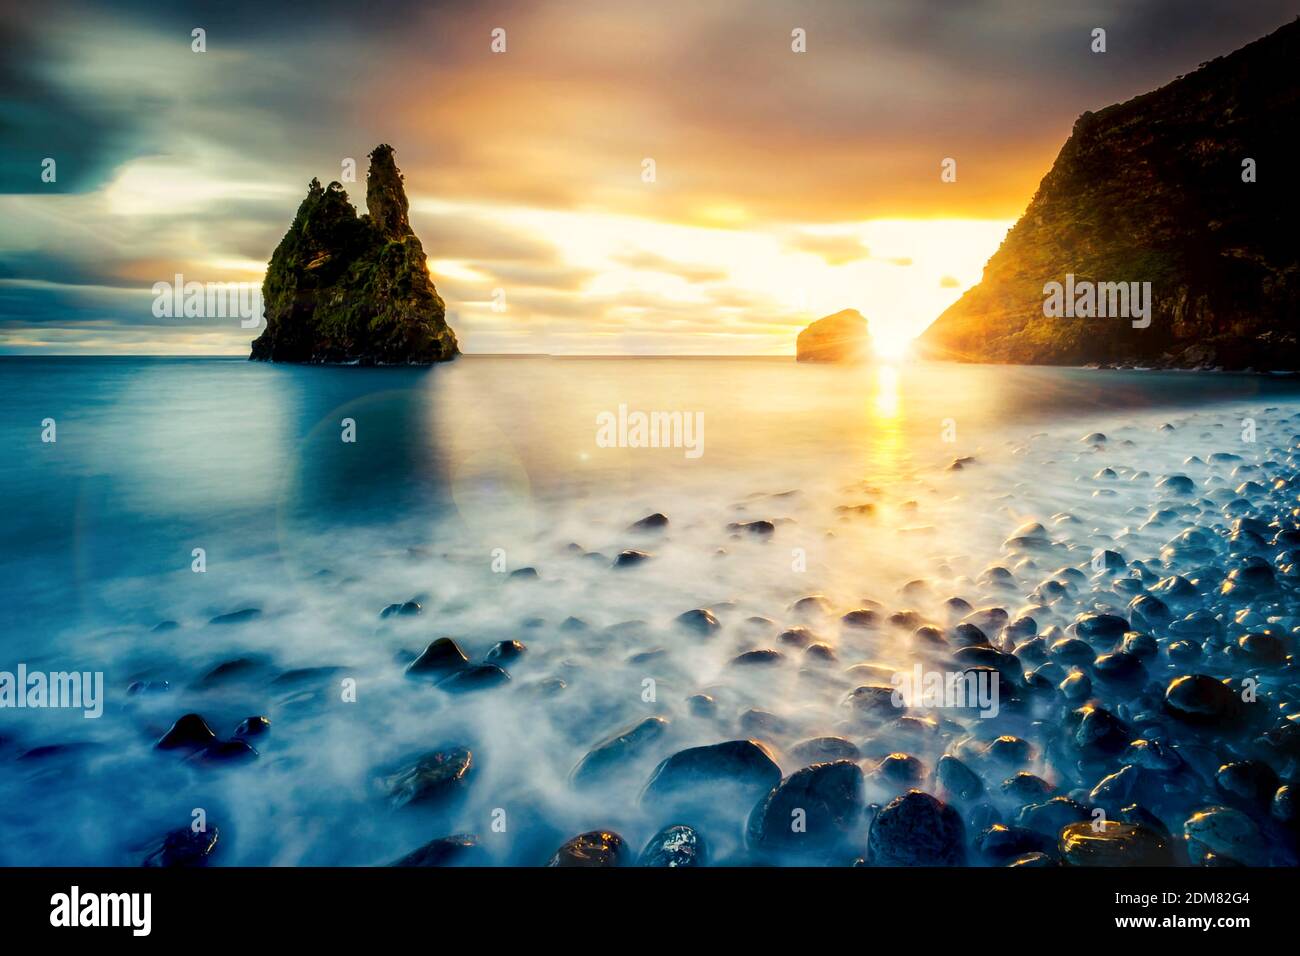 Scenic View Of Rocks In Sea Against Sky During Sunset Stock Photo